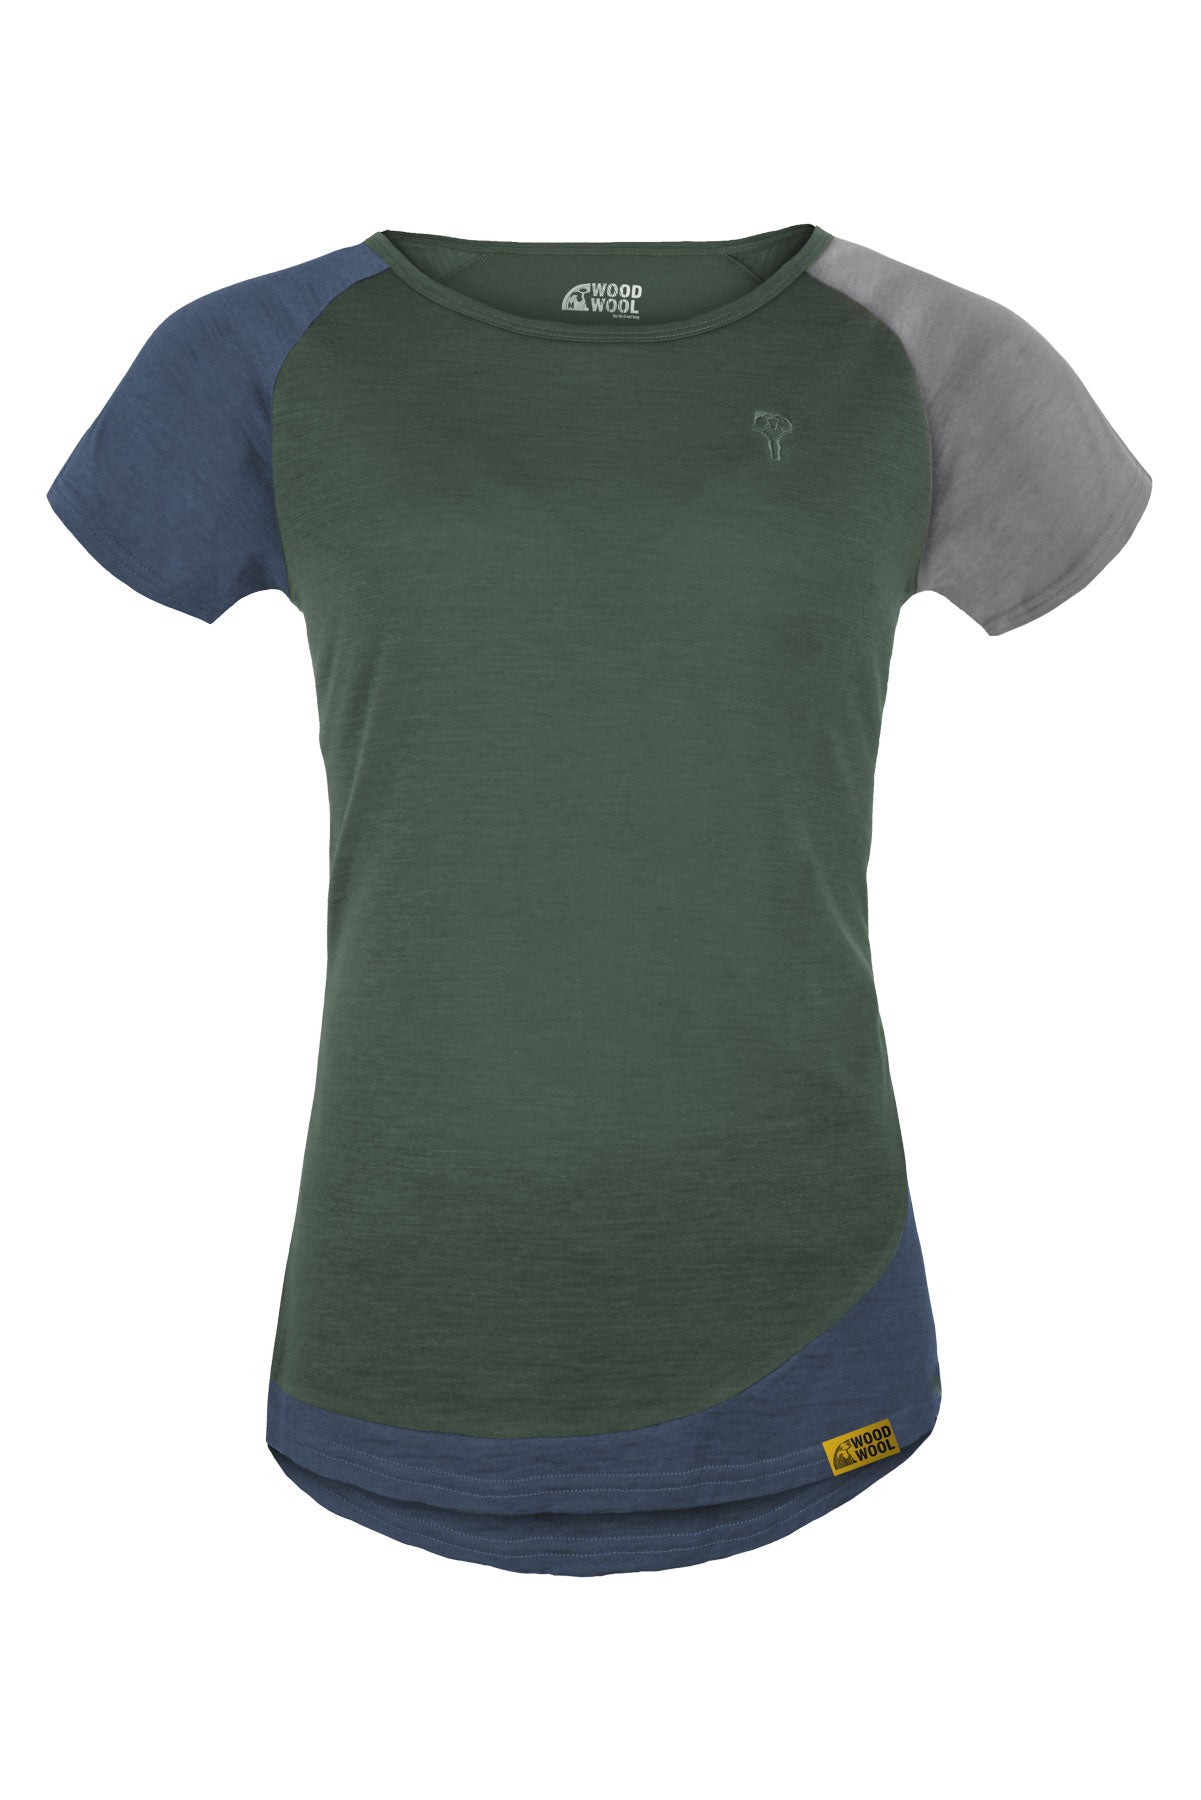 WoodWool T-Shirt Lady Janeway - Bayberry Green